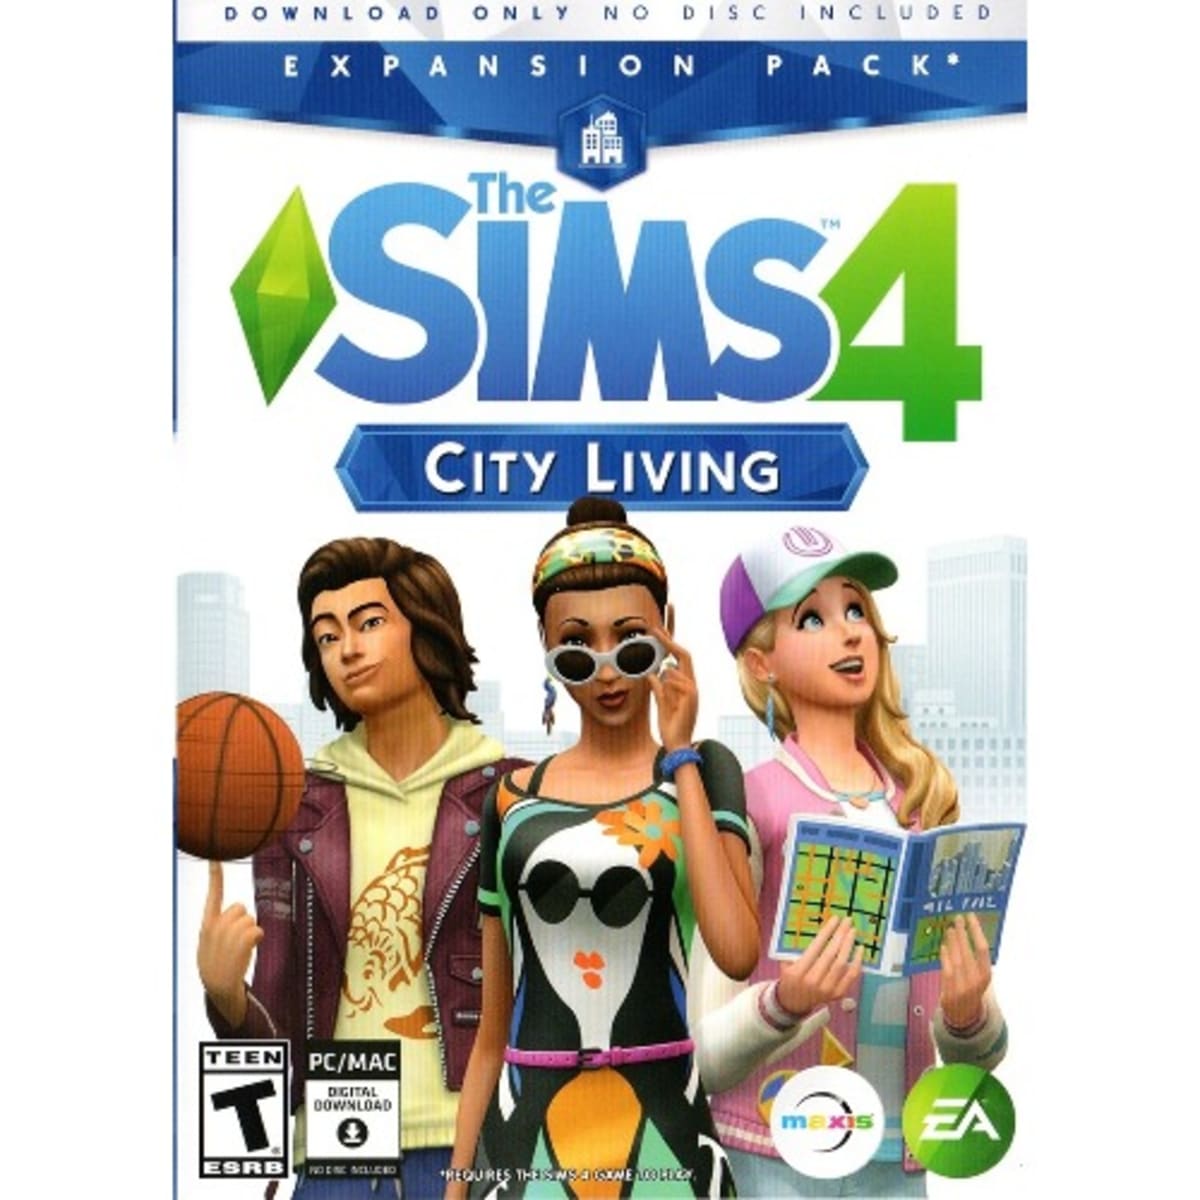 The Sims 4 Free Download + Serial Key